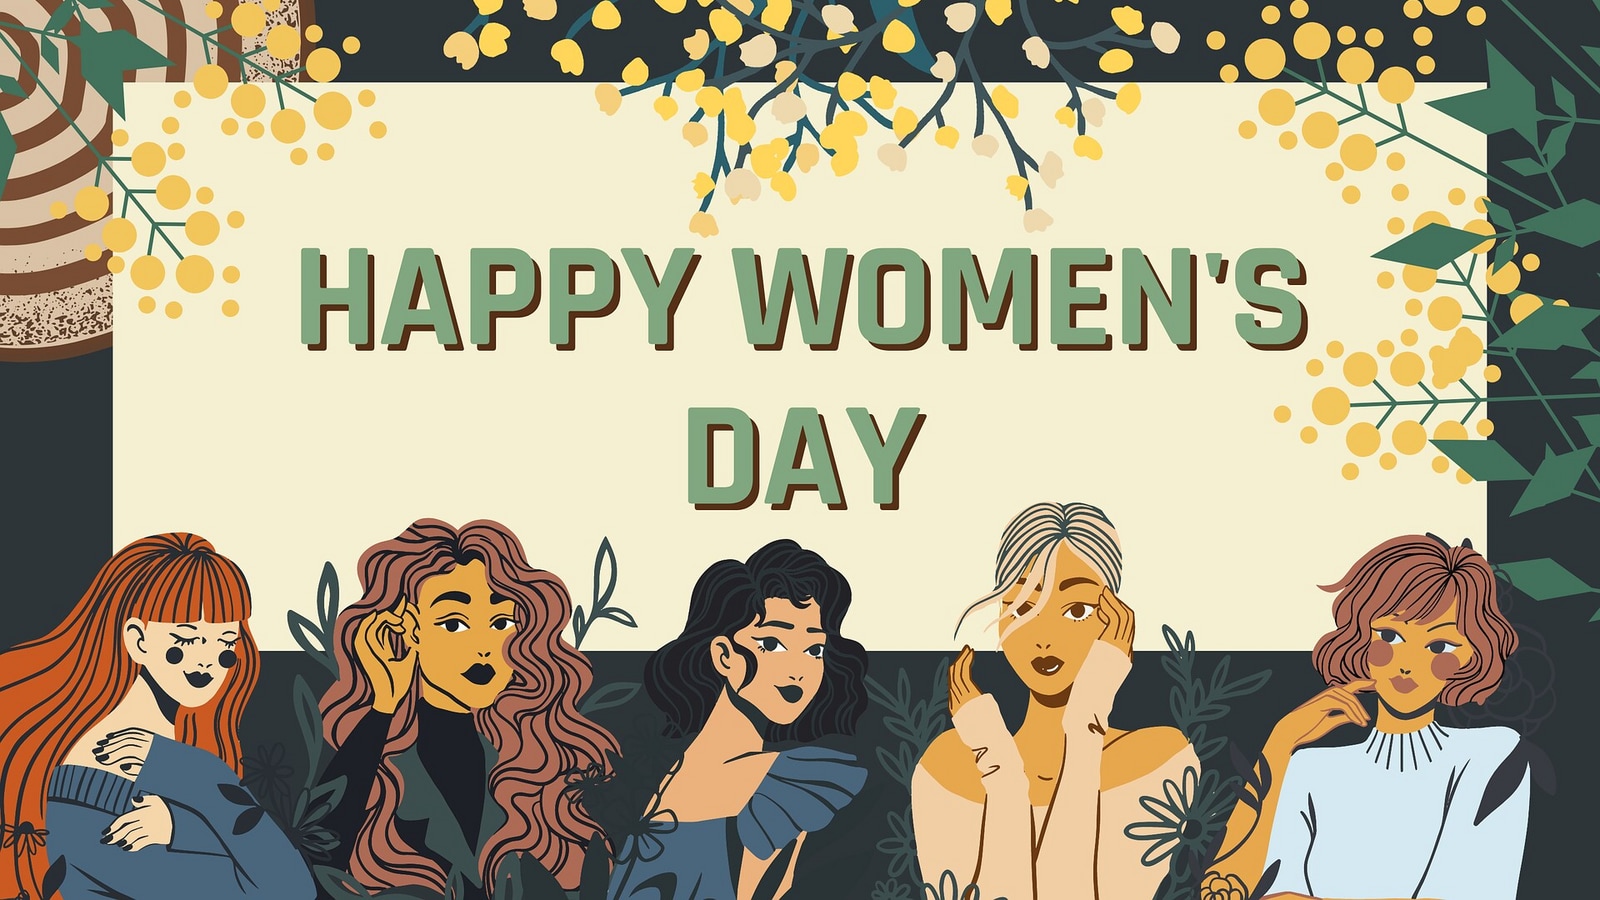 Happy Women's Day 2022: Check out these 20 inspiring quotes